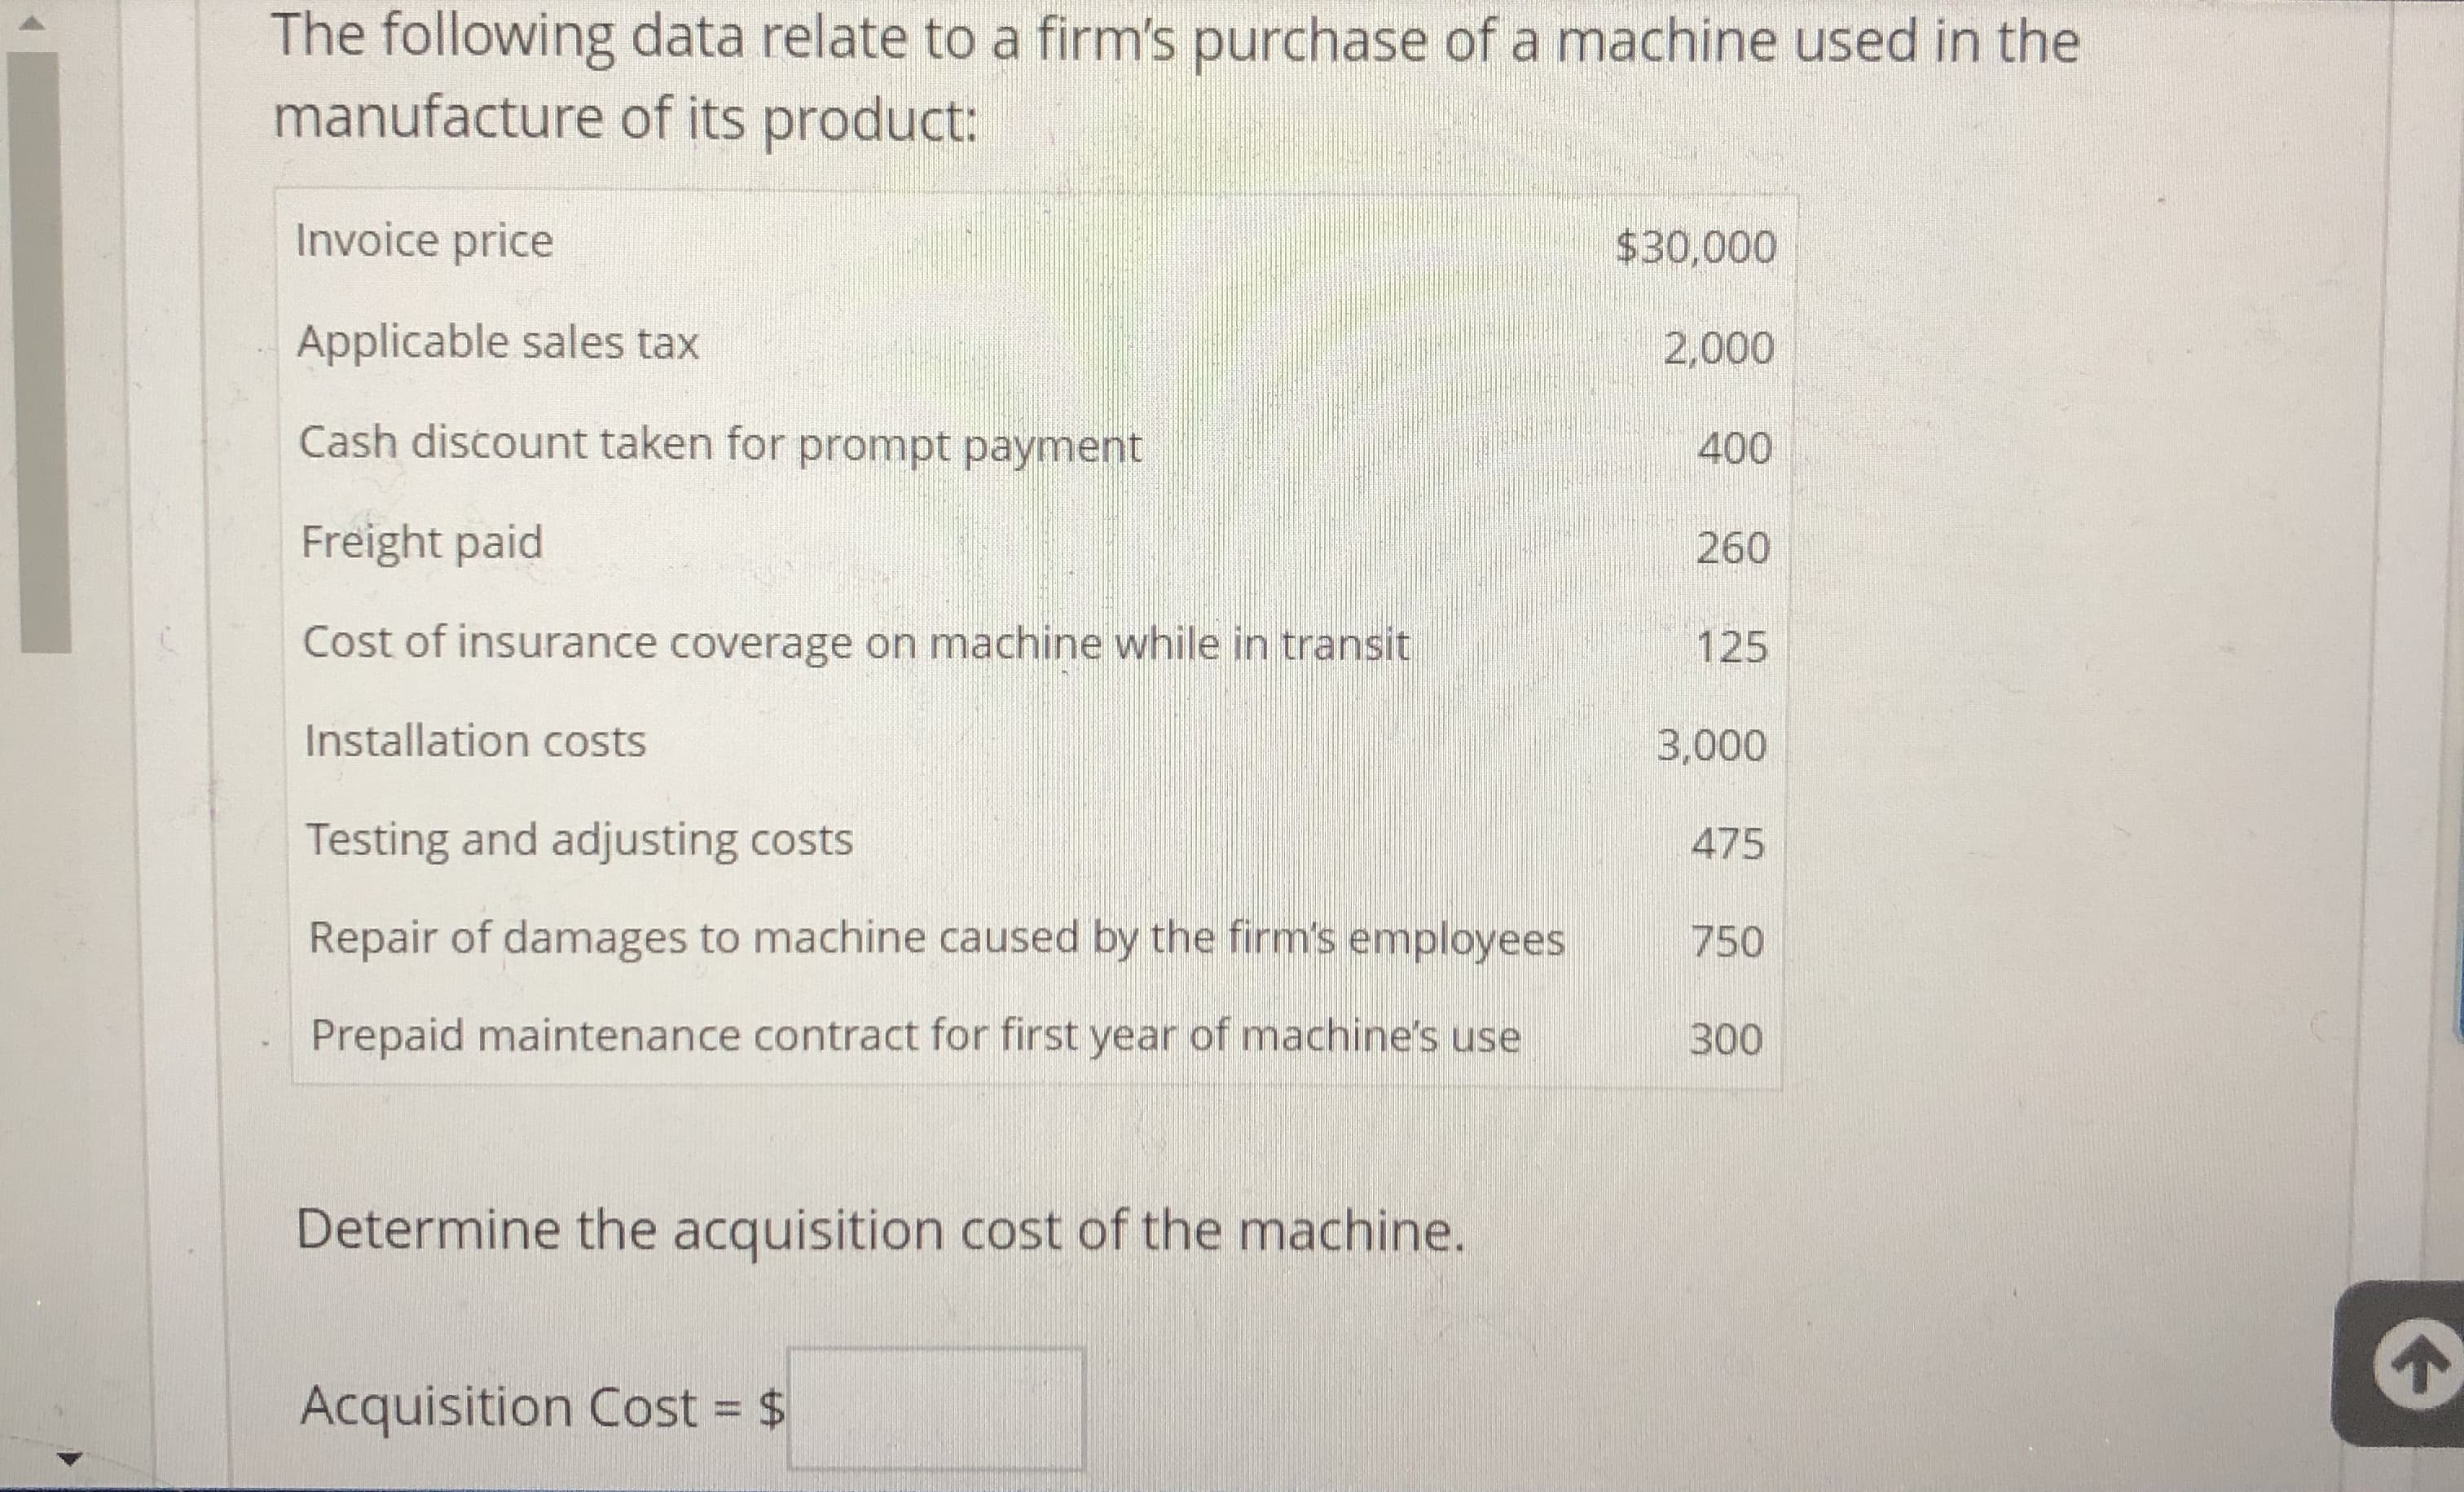 The following data relate to a firm's purchase of a machine used in the
manufacture of its product:
Invoice price
Applicable sales tax
Cash discount taken for prompt payment
Freight paid
Cost of insurance coverage on machine while in transit
Installation costs
Testing and adjusting costs
Repair of damages to machine caused by the firm's employees
Prepaid maintenance contract for first year of machine's use
$30,00o
2,000
400
260
125
3,000
475
750
300
Determine the acquisition cost of the machine.
个
Acquisition Cost-
